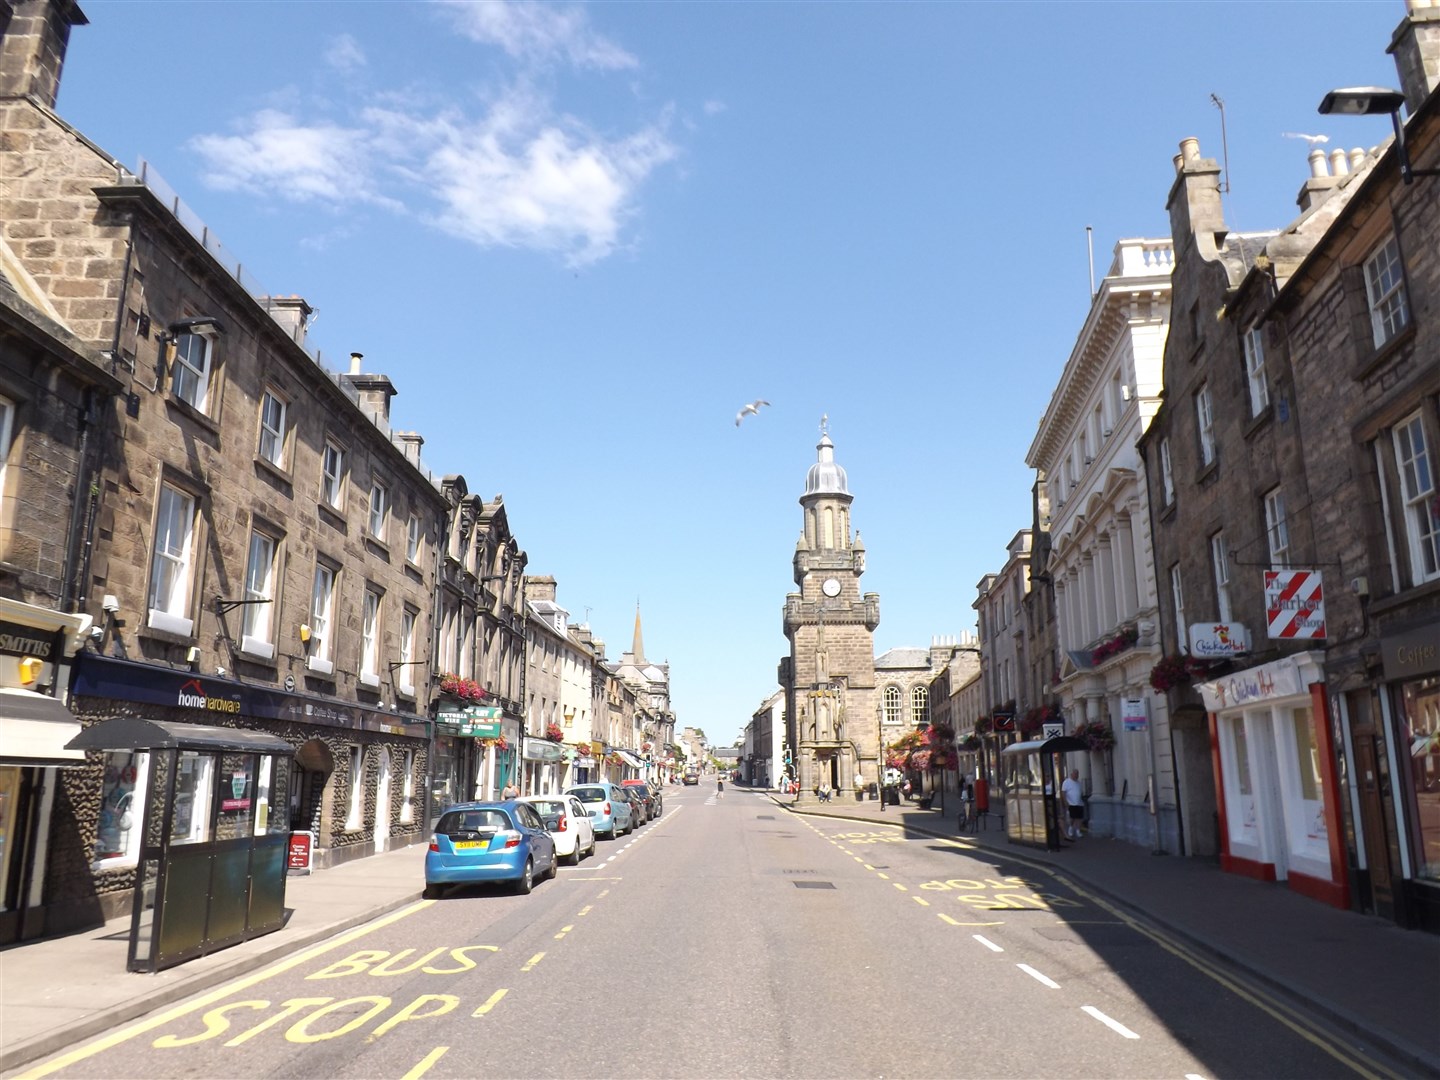 Forres High Street.